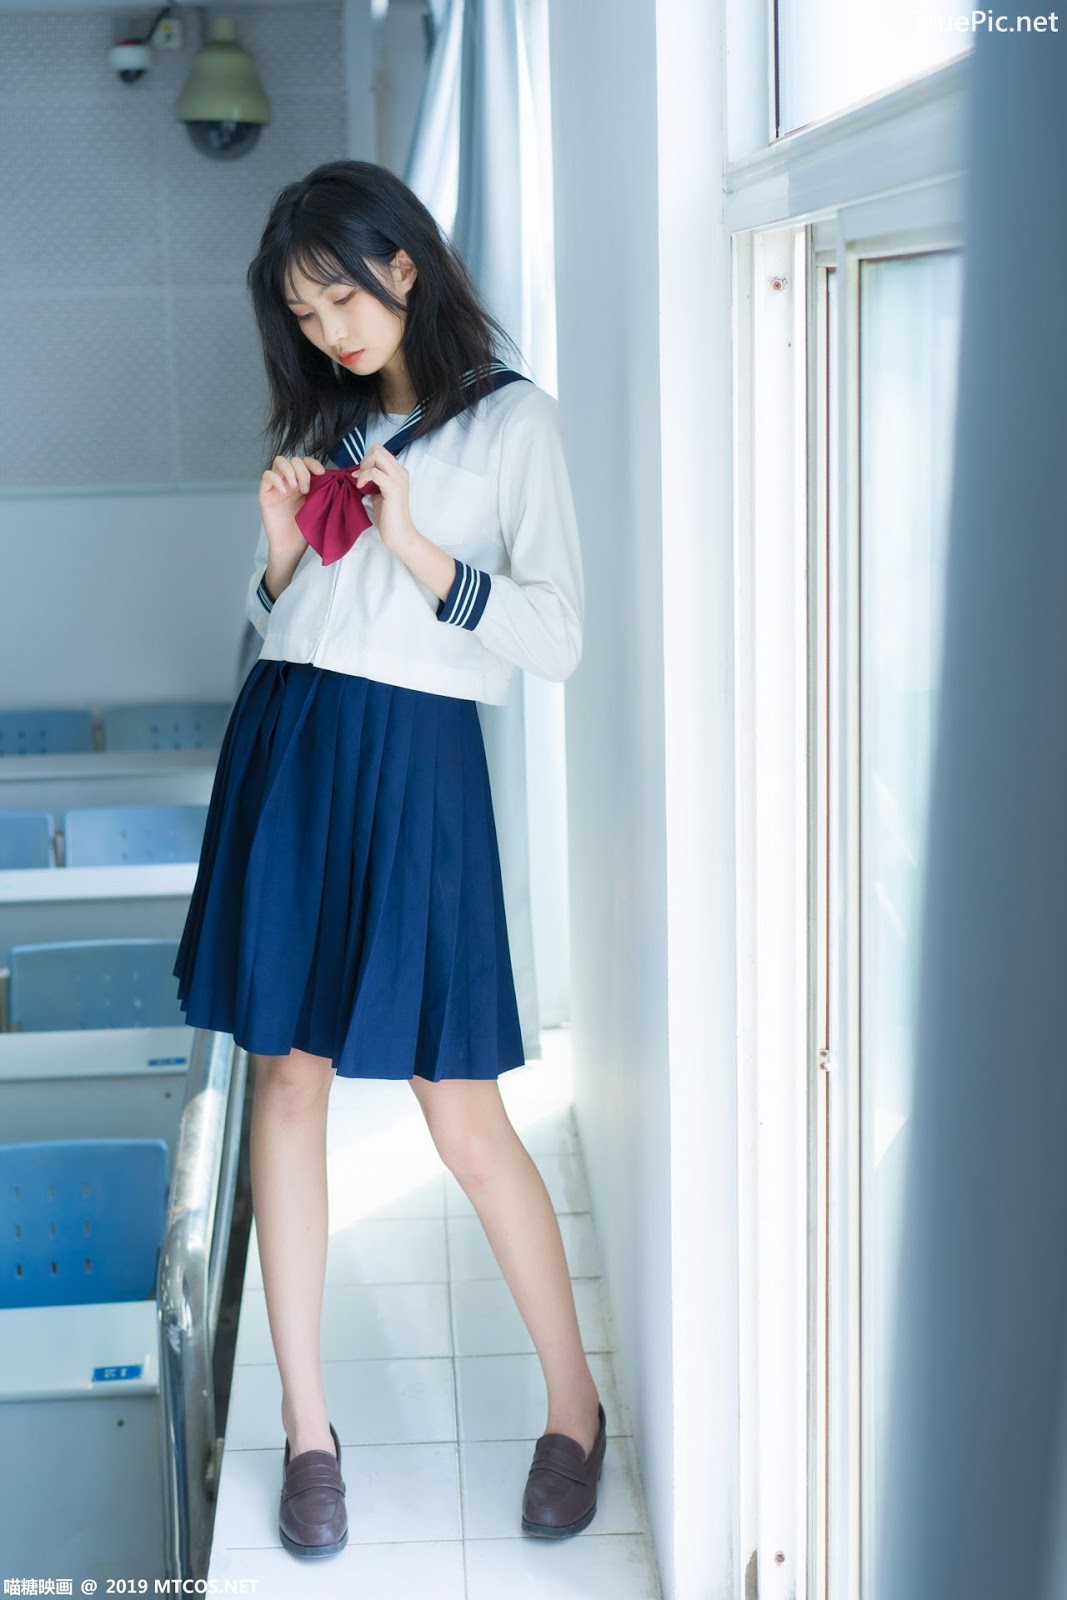 Image MTCos 喵糖映画 Vol.014 – Chinese Cute Model With Japanese School Uniform - TruePic.net- Picture-13